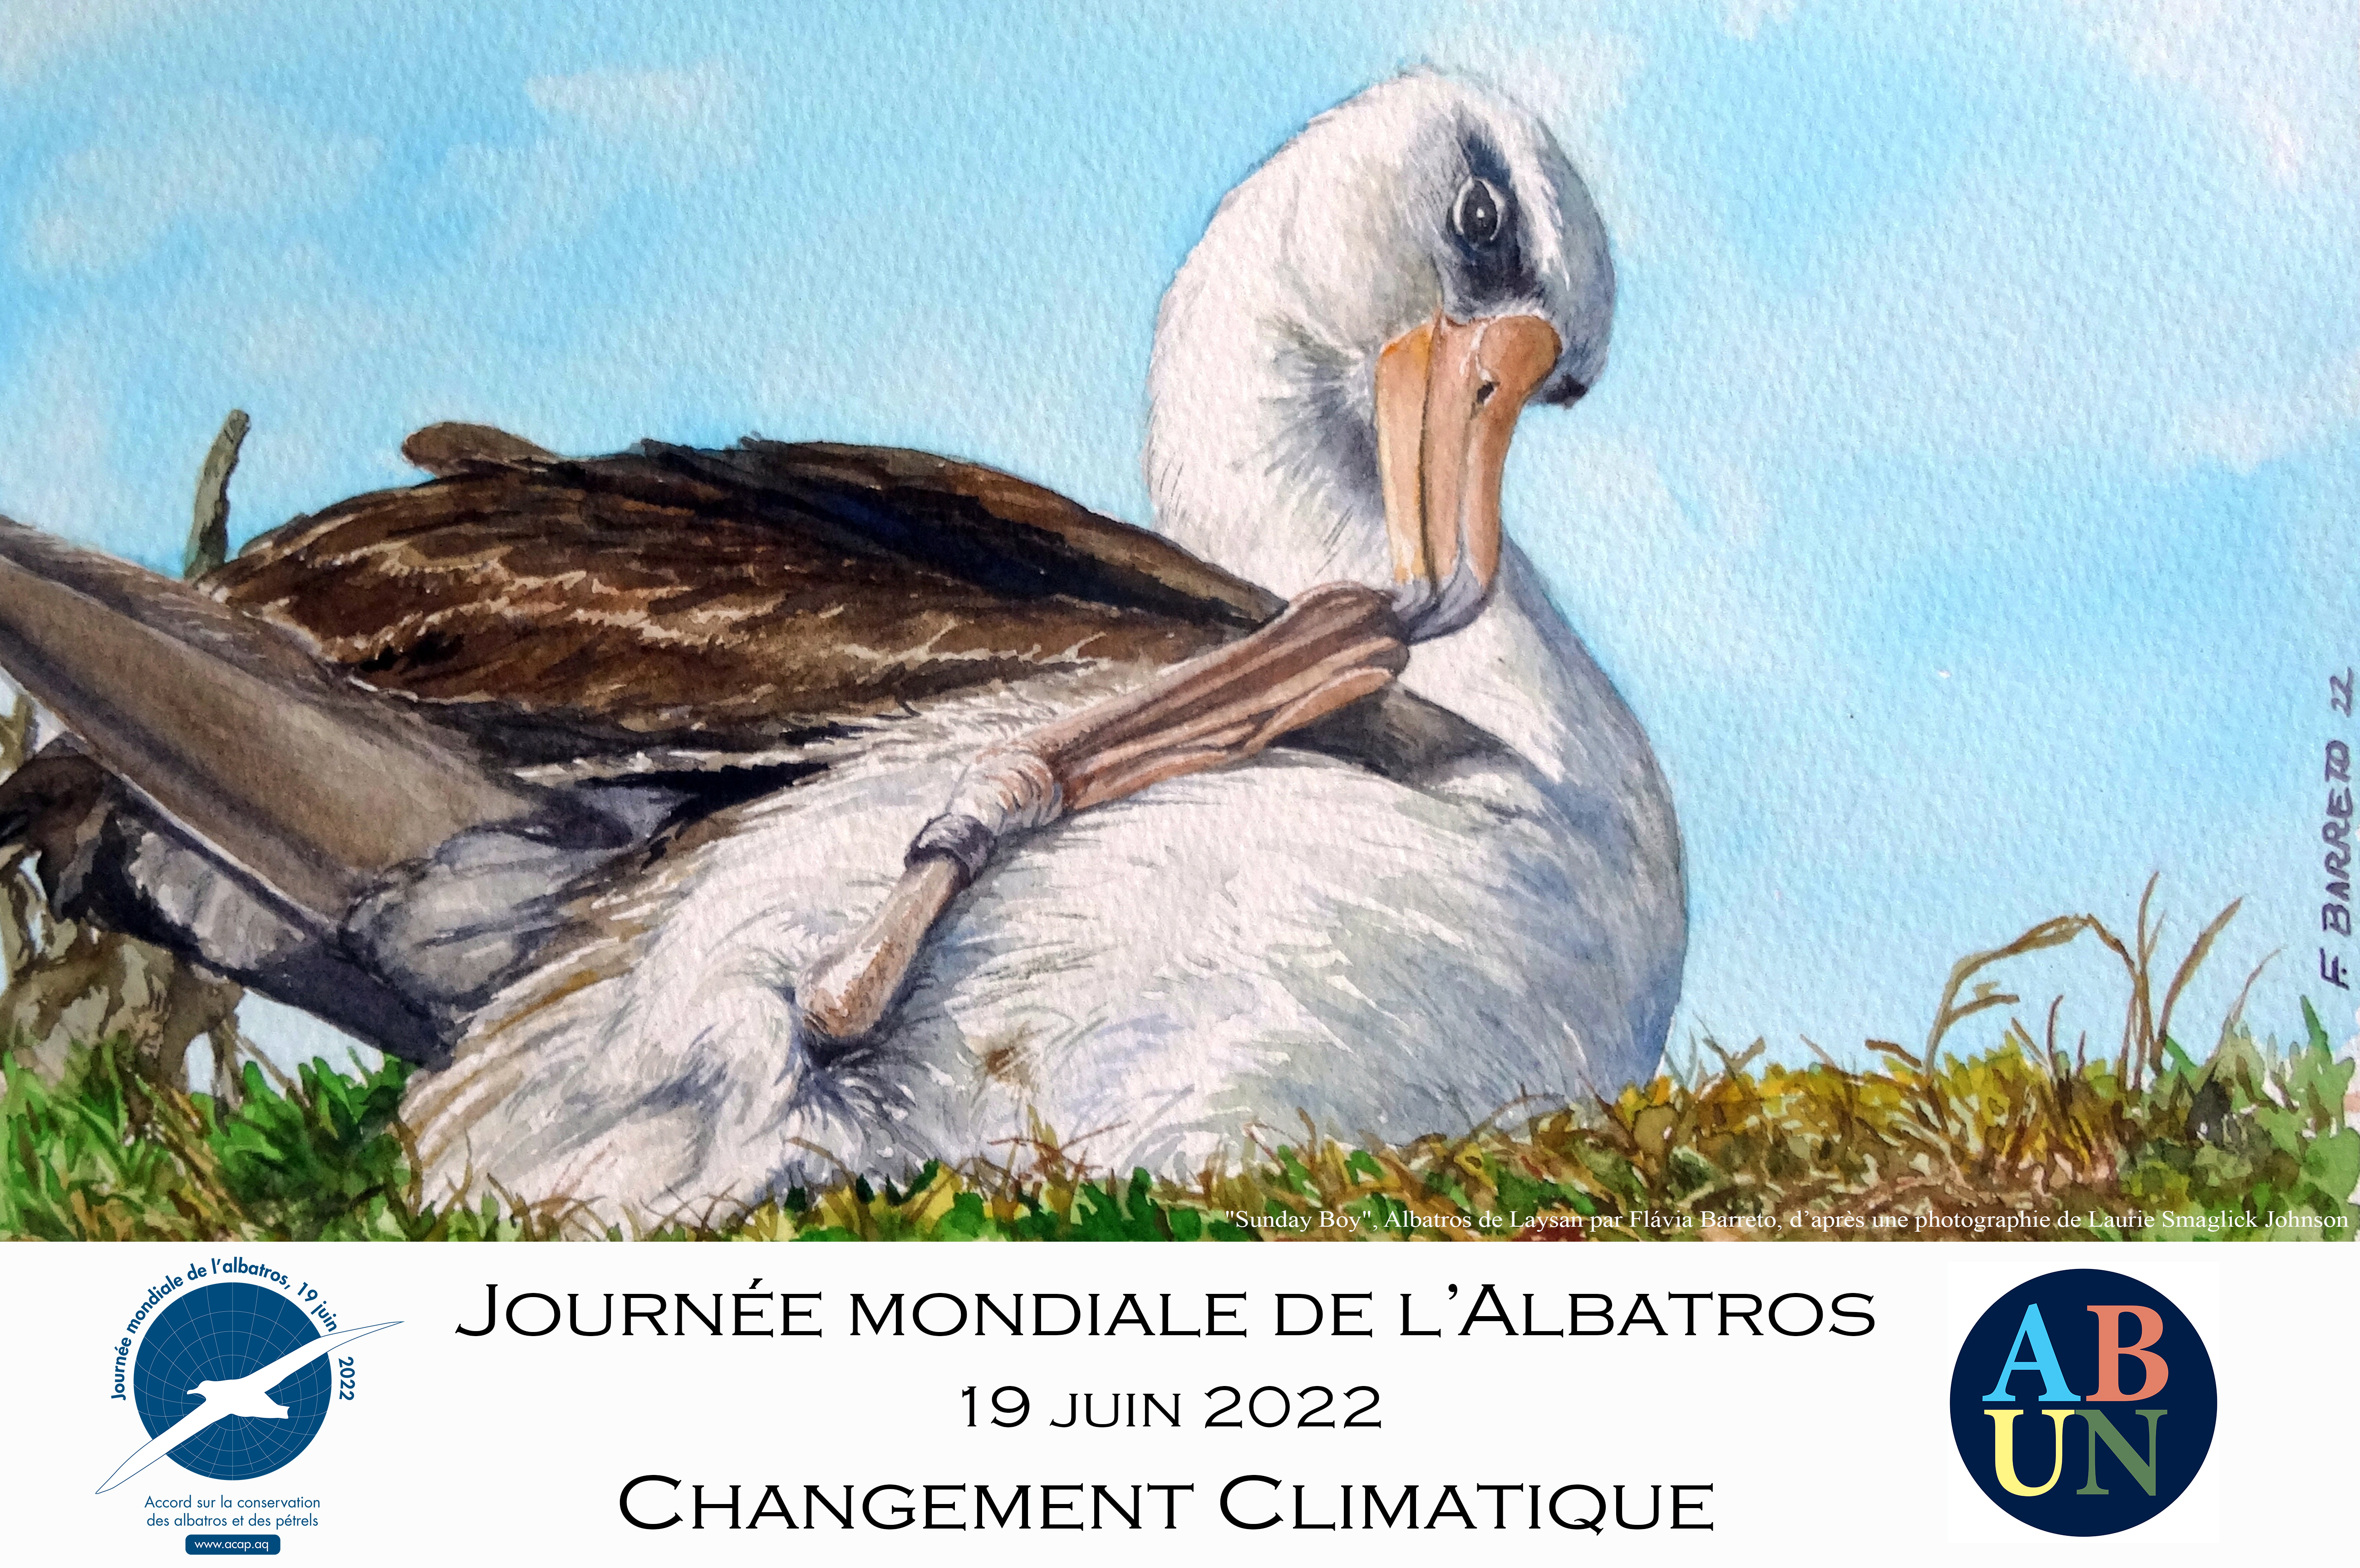 Fr Sunday Boy Laysan Albatross by Flávia Barreto after a photograph by Laurie Smaglick Johnson French